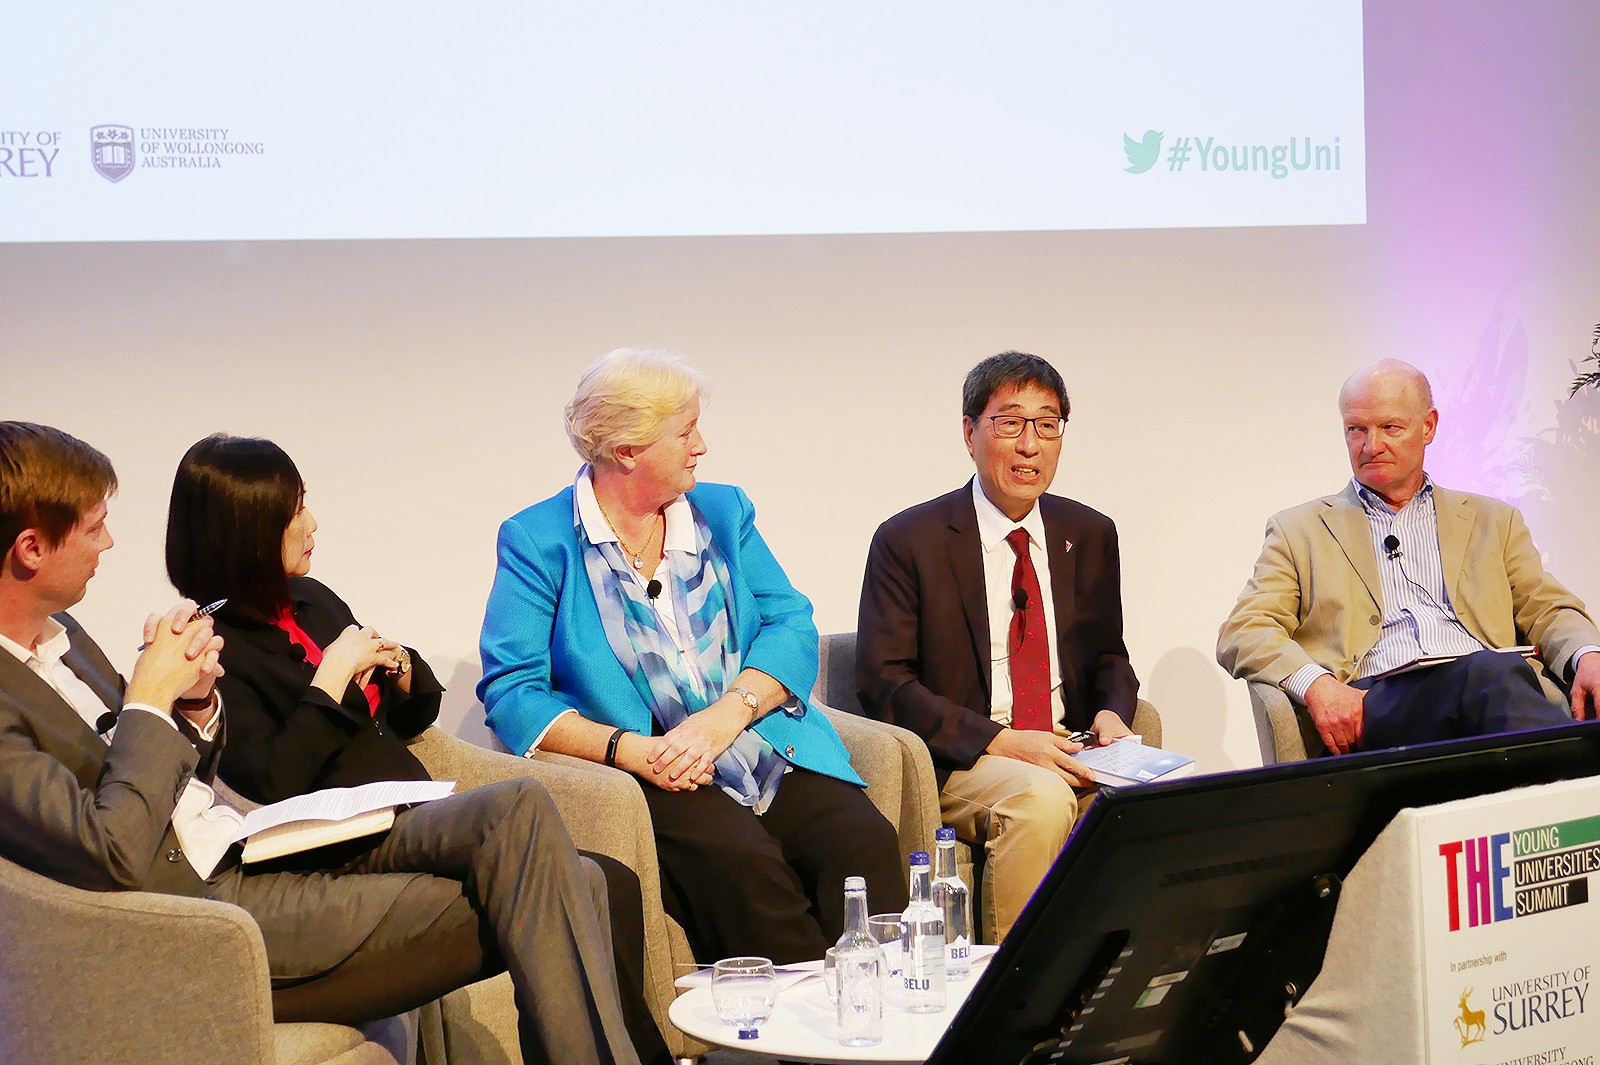 President Kuo (second from right) attends the THE Young Universities Summit.